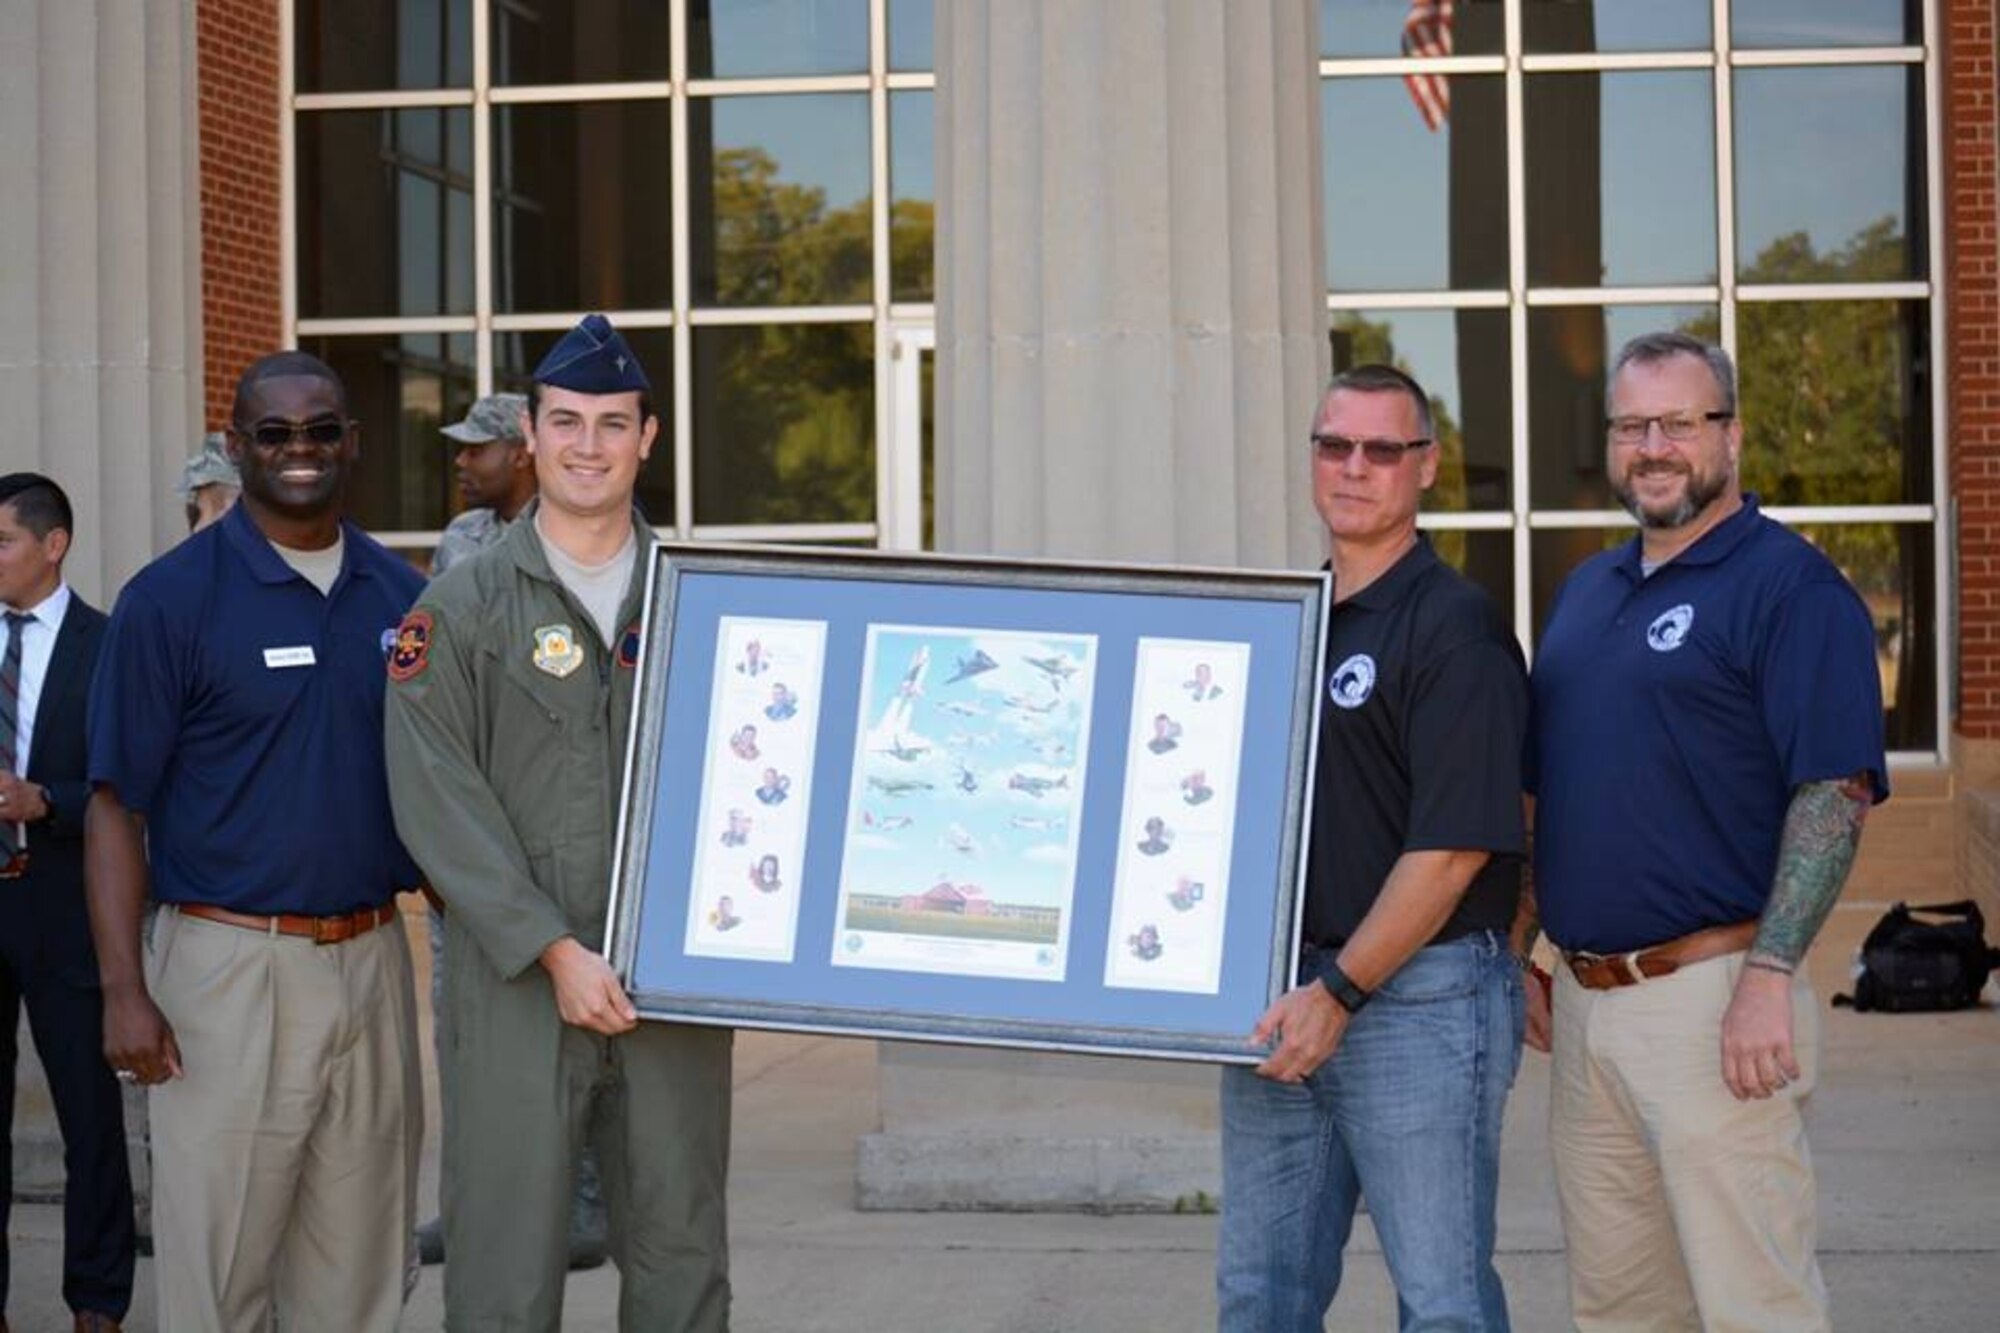 Students and faculty from ACSC traveled to Auburn University’s AFROTC detachment to participate in the detachment’s career day Oct. 13th.  After talking with cadets about career opportunities in the Air Force, the Gathering of Eagles Foundation presented the detachment with a lithograph of previous Eagles who made lasting contributions to air power.  (U.S. Air Force photo by Maj. Will Powell)